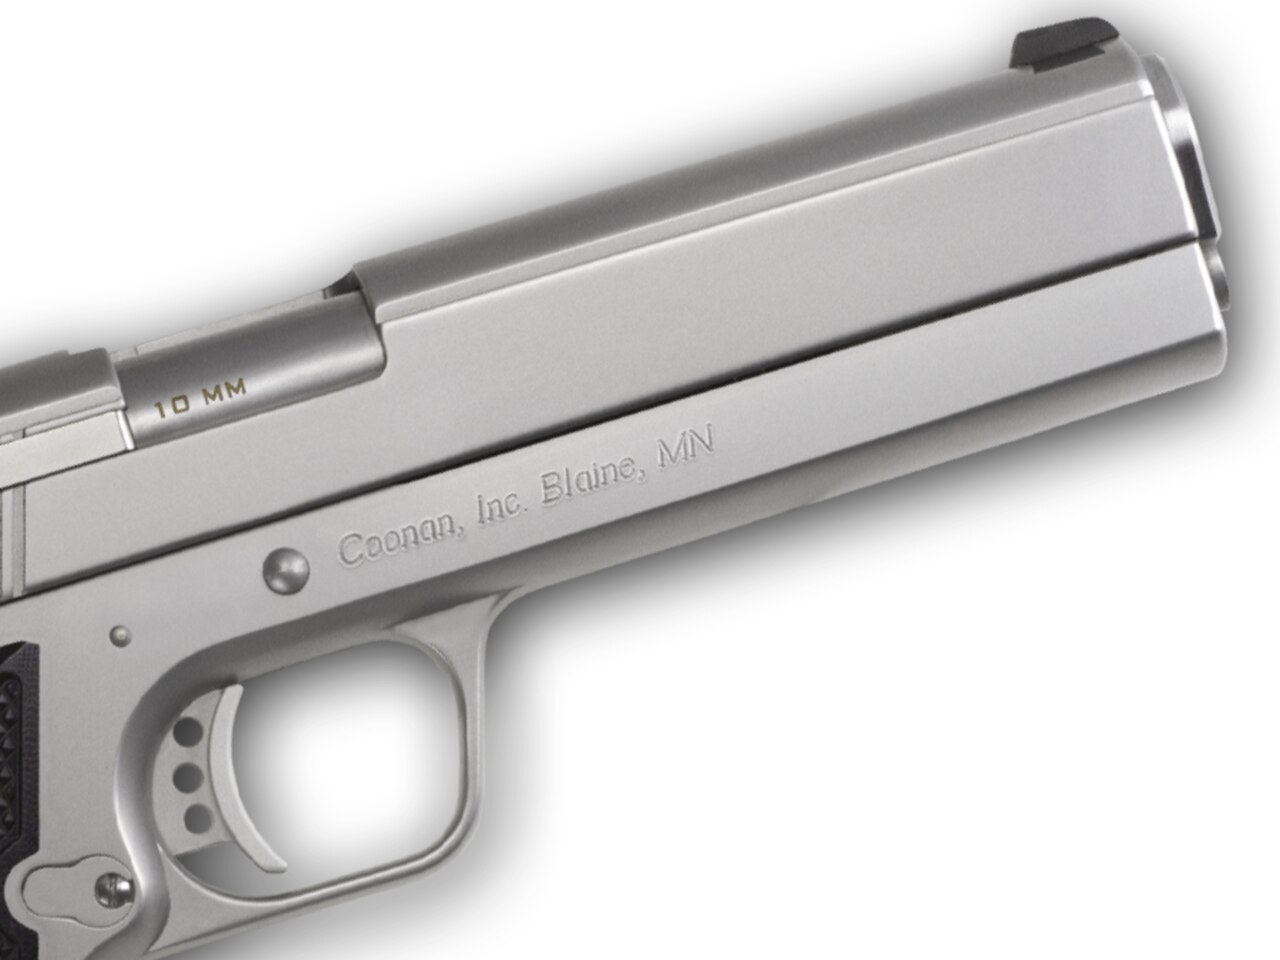 Image of Coonan MOT 10mm, 5", Satin Stainless, Adj. Night Sights, Black Alum Grips, 2 Mags (Special Order)